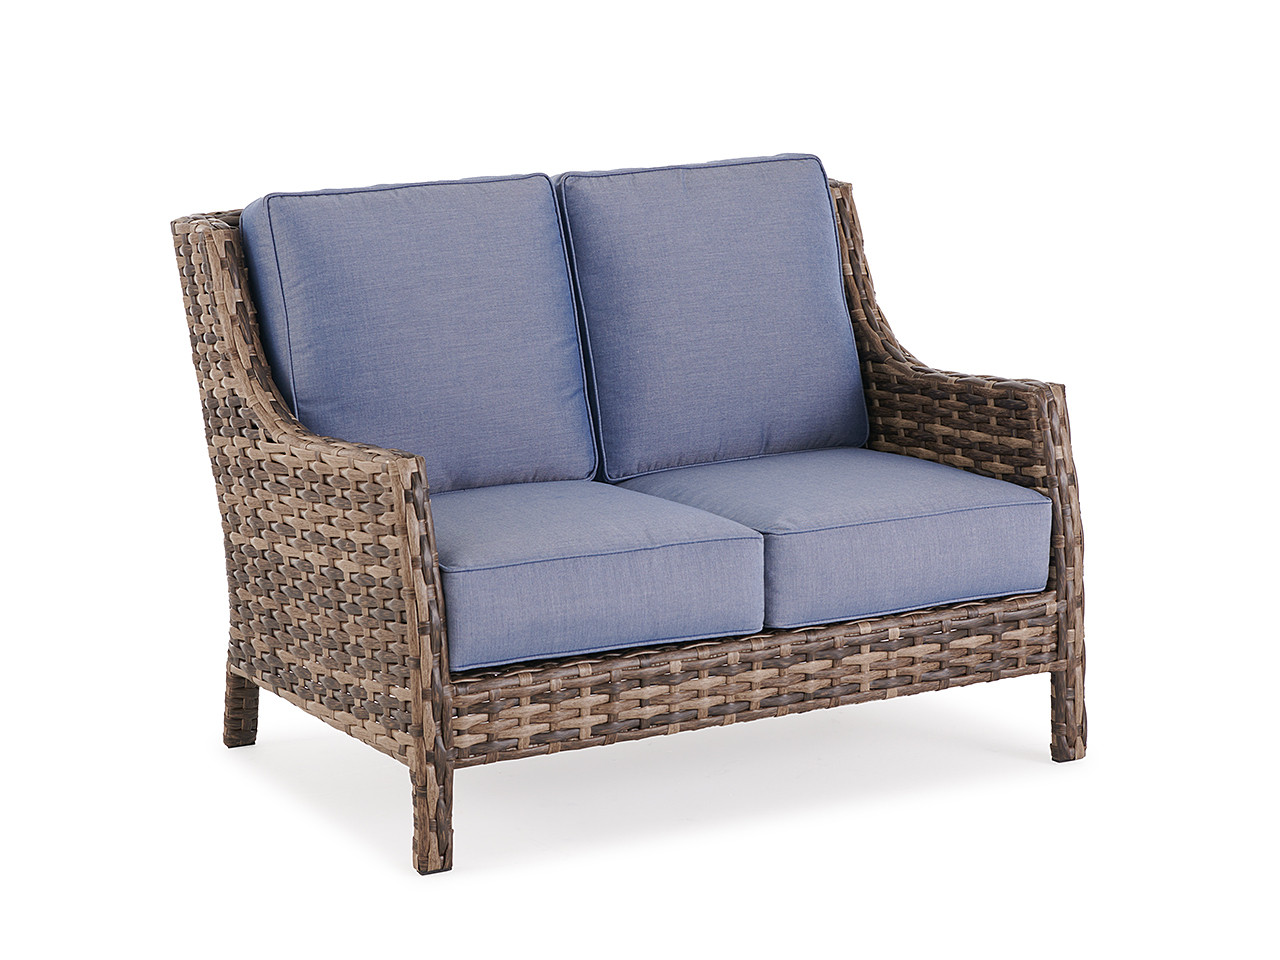 Cabo Caribou Outdoor Wicker and Remy Denim Cushion 4 Pc. Loveseat Group with 40 x 28 in. Coffee Table